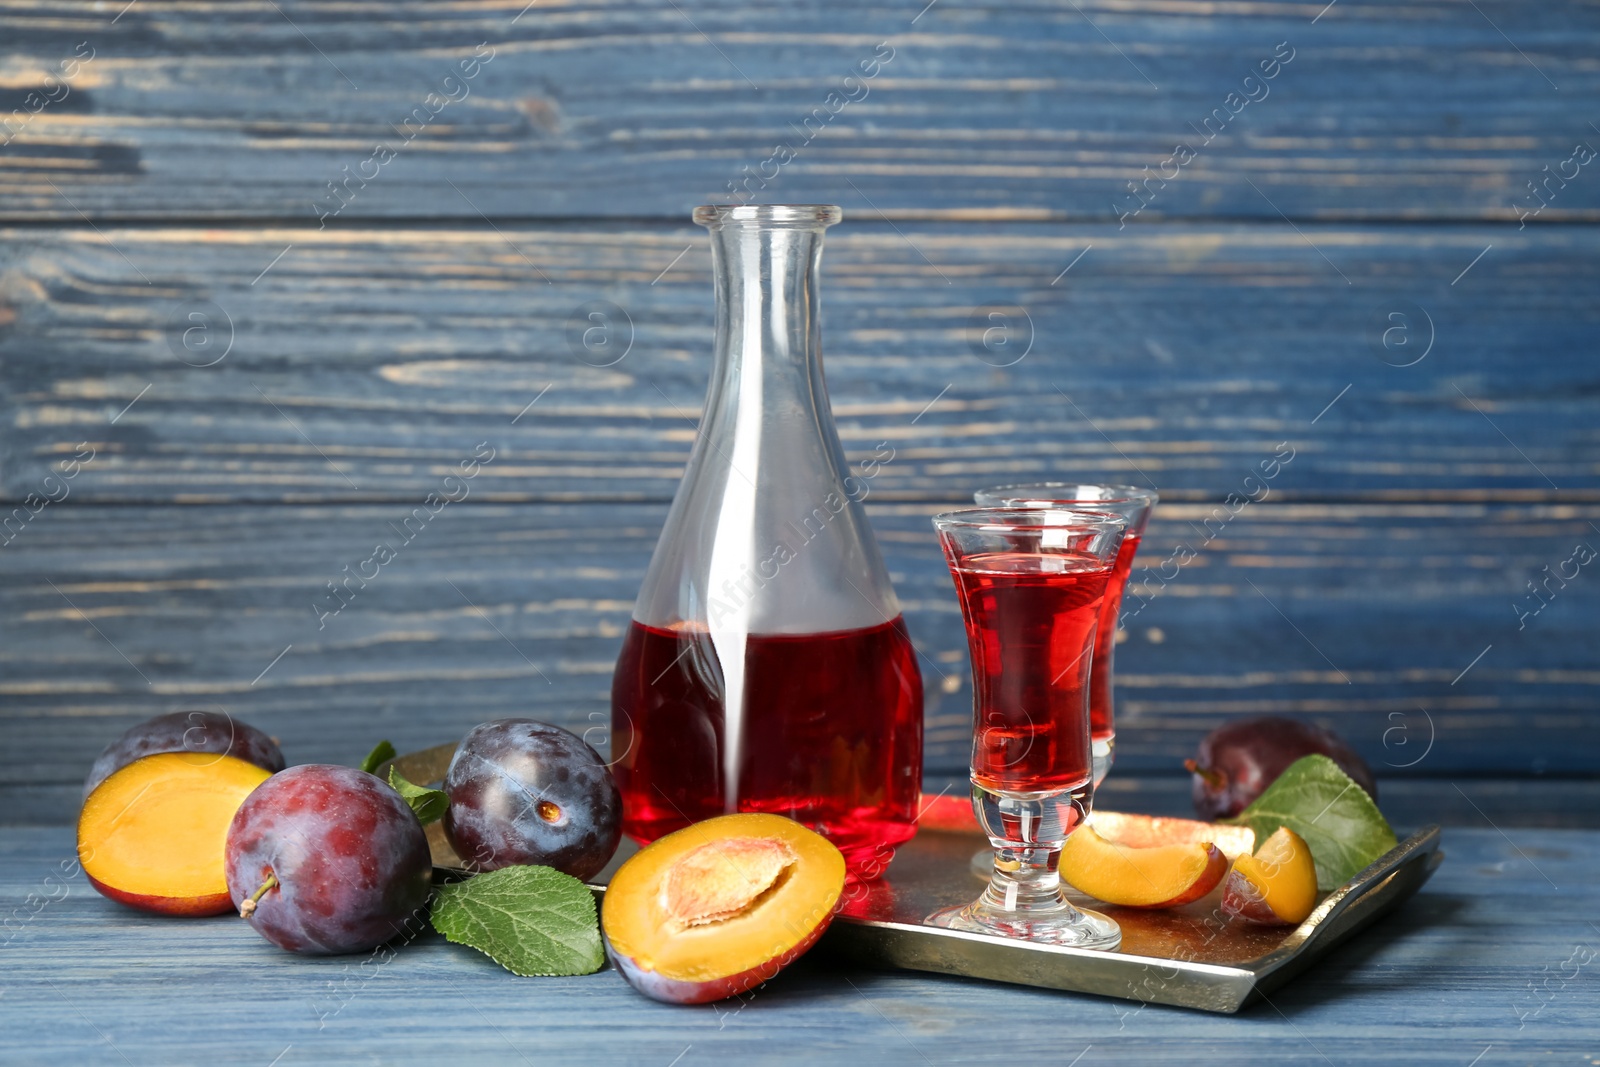 Photo of Delicious plum liquor and ripe fruits on blue wooden table. Homemade strong alcoholic beverage